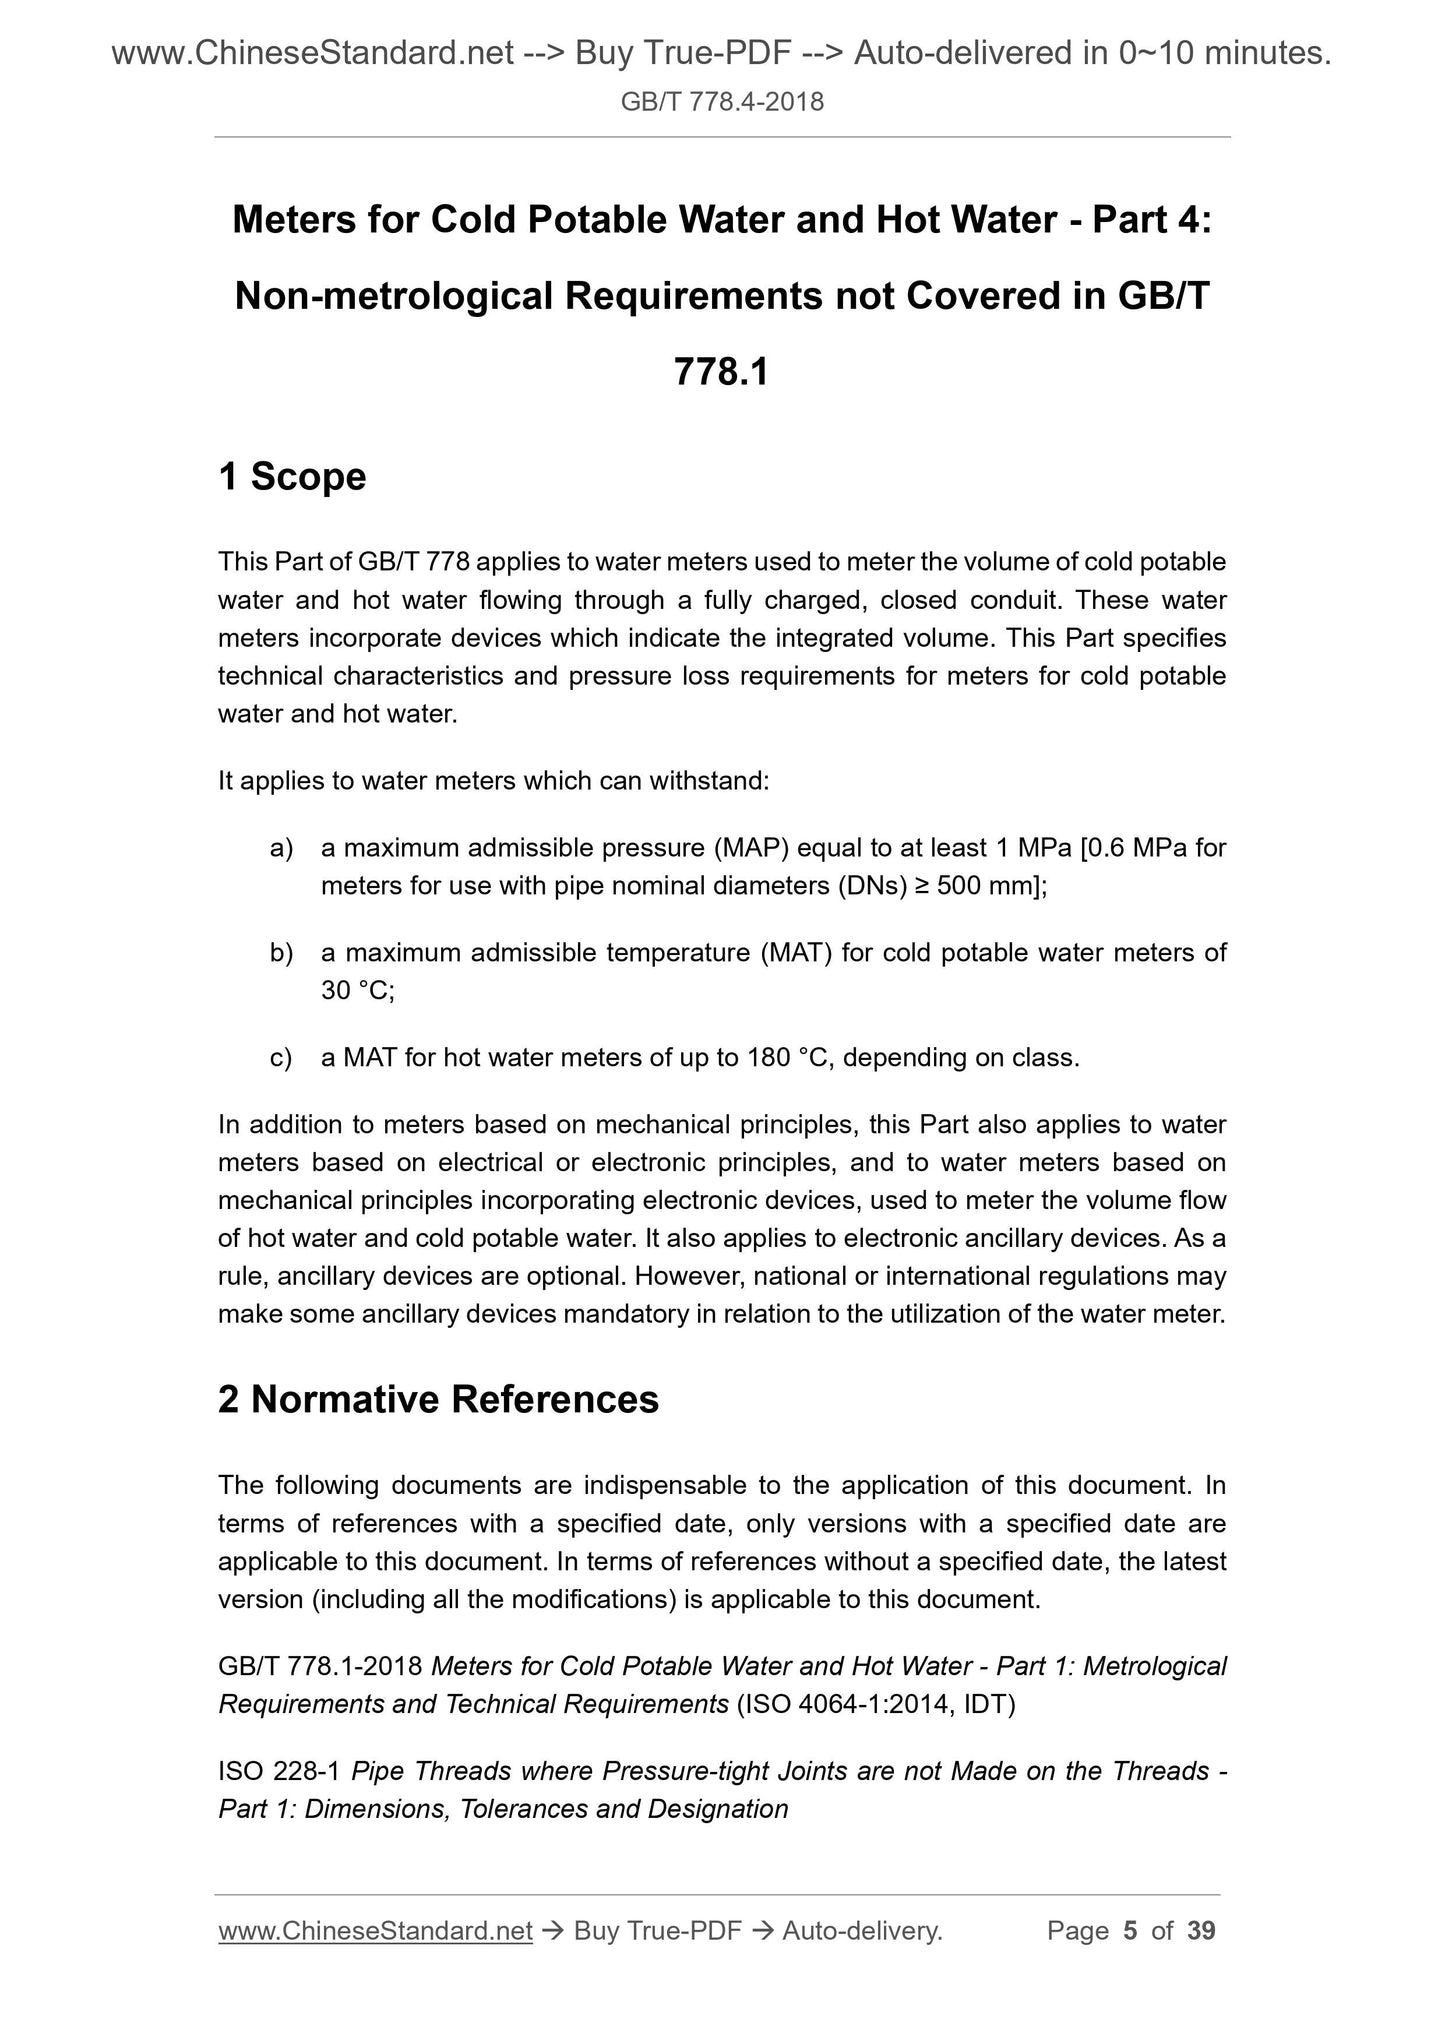 GB/T 778.4-2018 Page 5